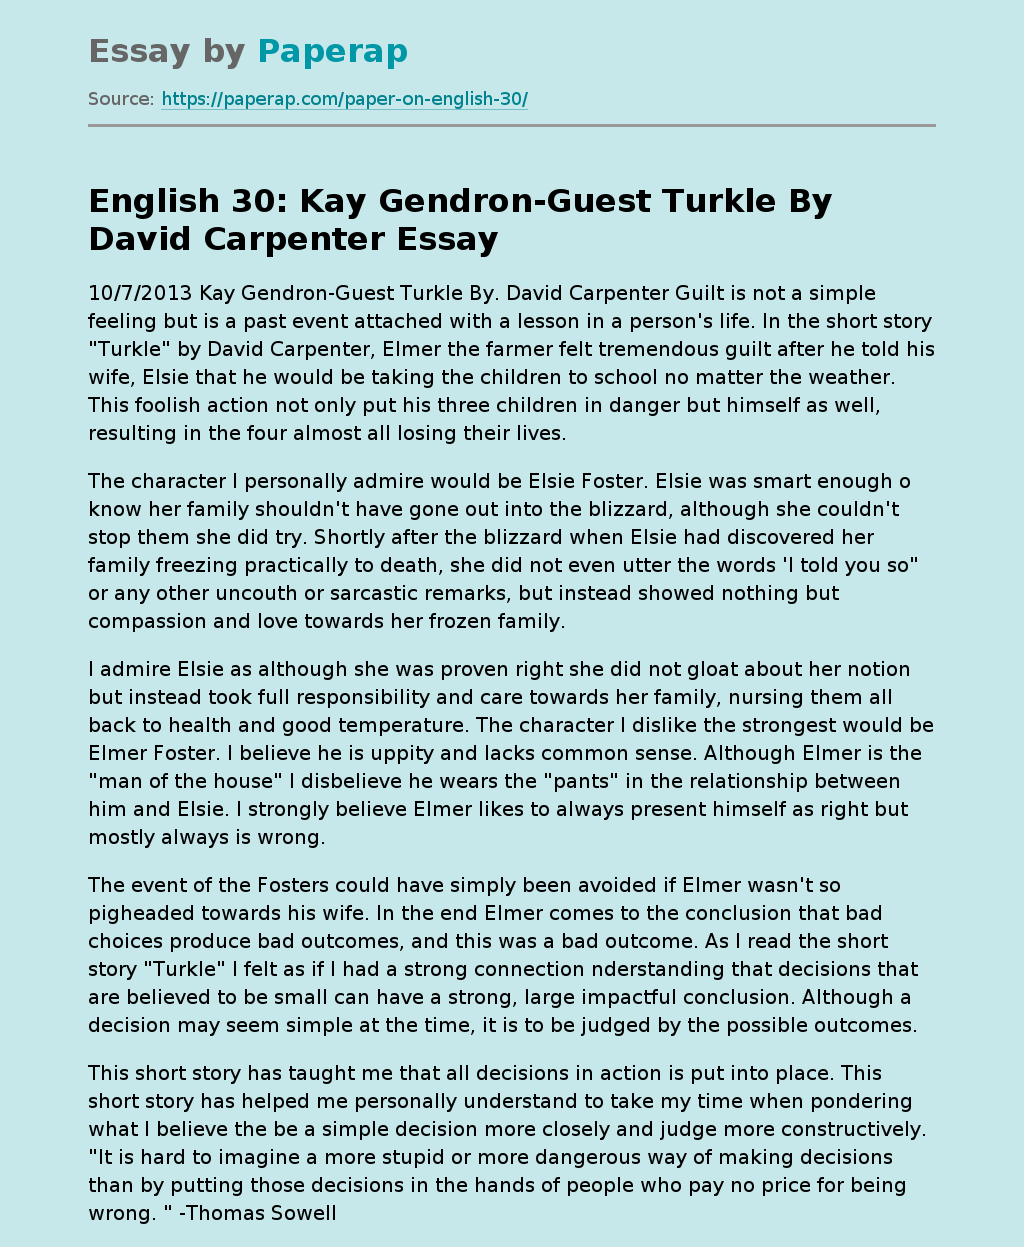 English 30: Kay Gendron-Guest Turkle By David Carpenter